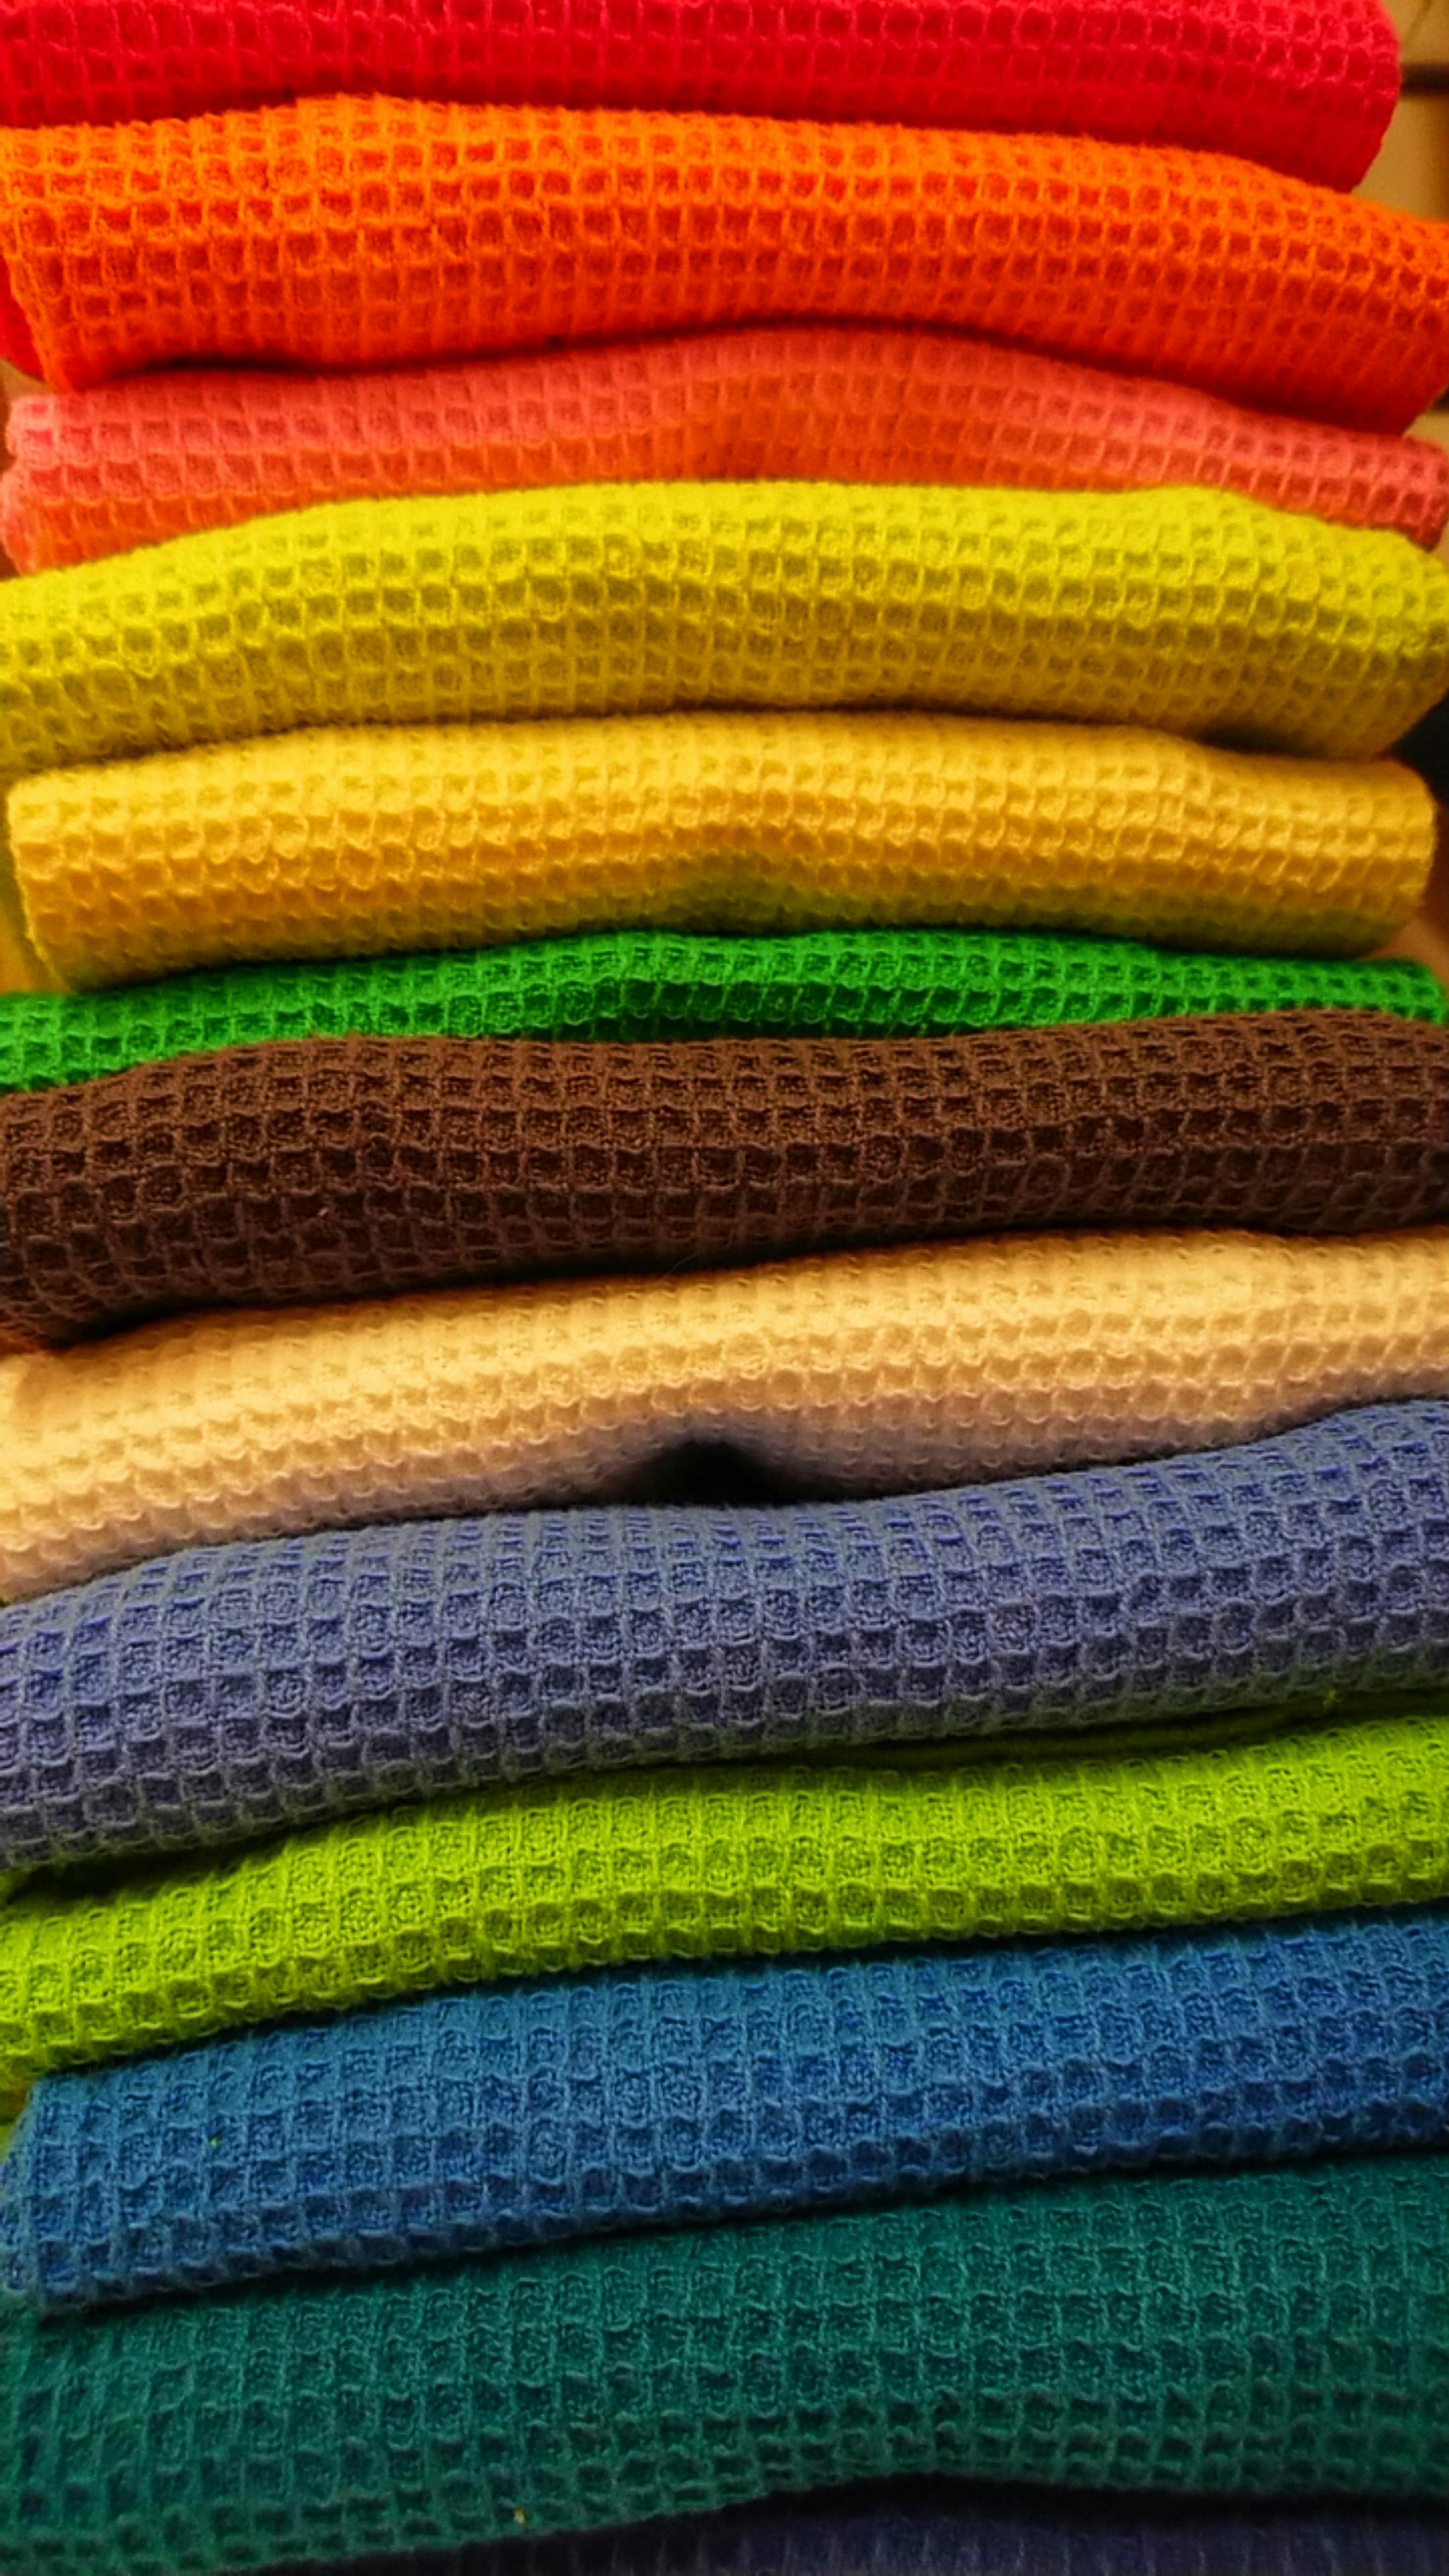 Free stock photo of cloths colors yellow orange green blue stack repet